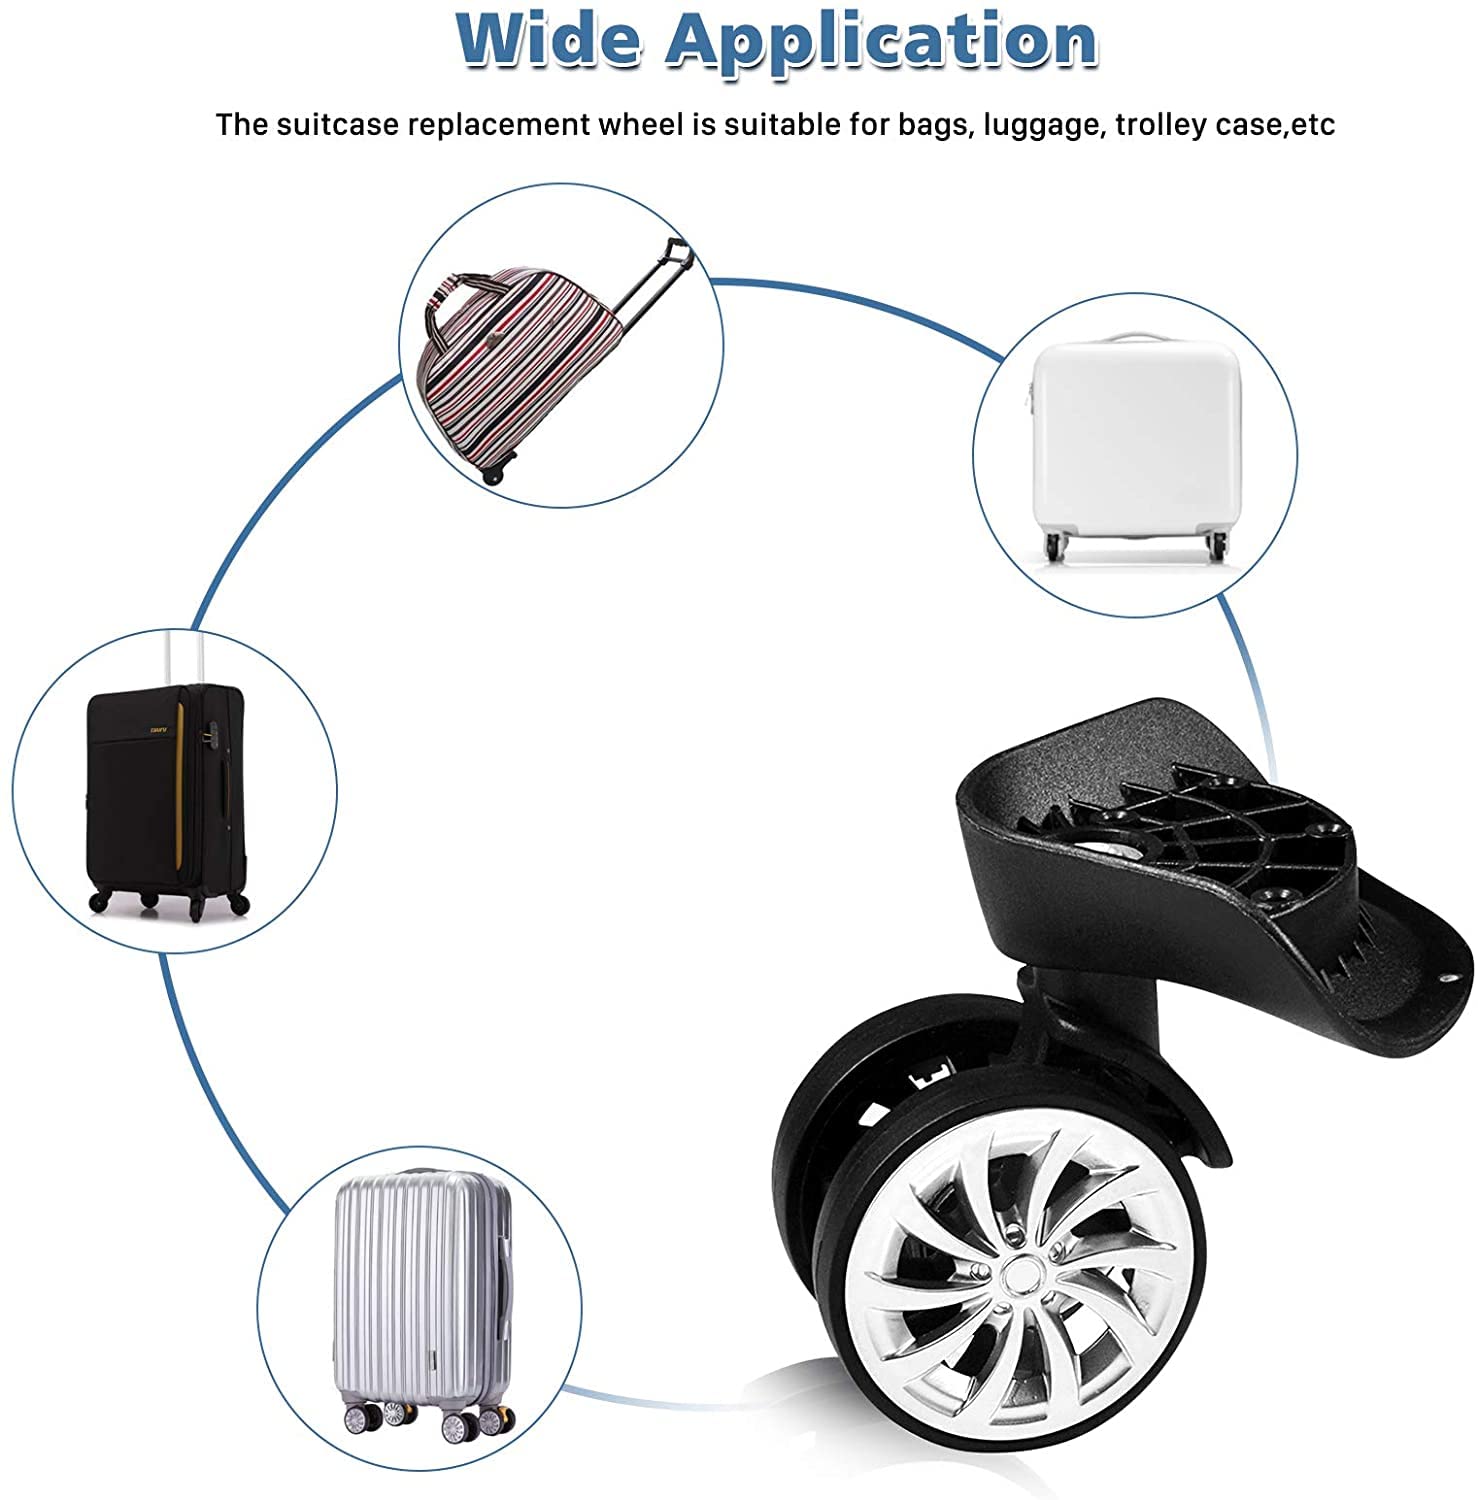 1Pair Luggage Suitcase Replacement Wheels,Swivel Durable Double Row Large Wheel Quiet Suitcase Wheels